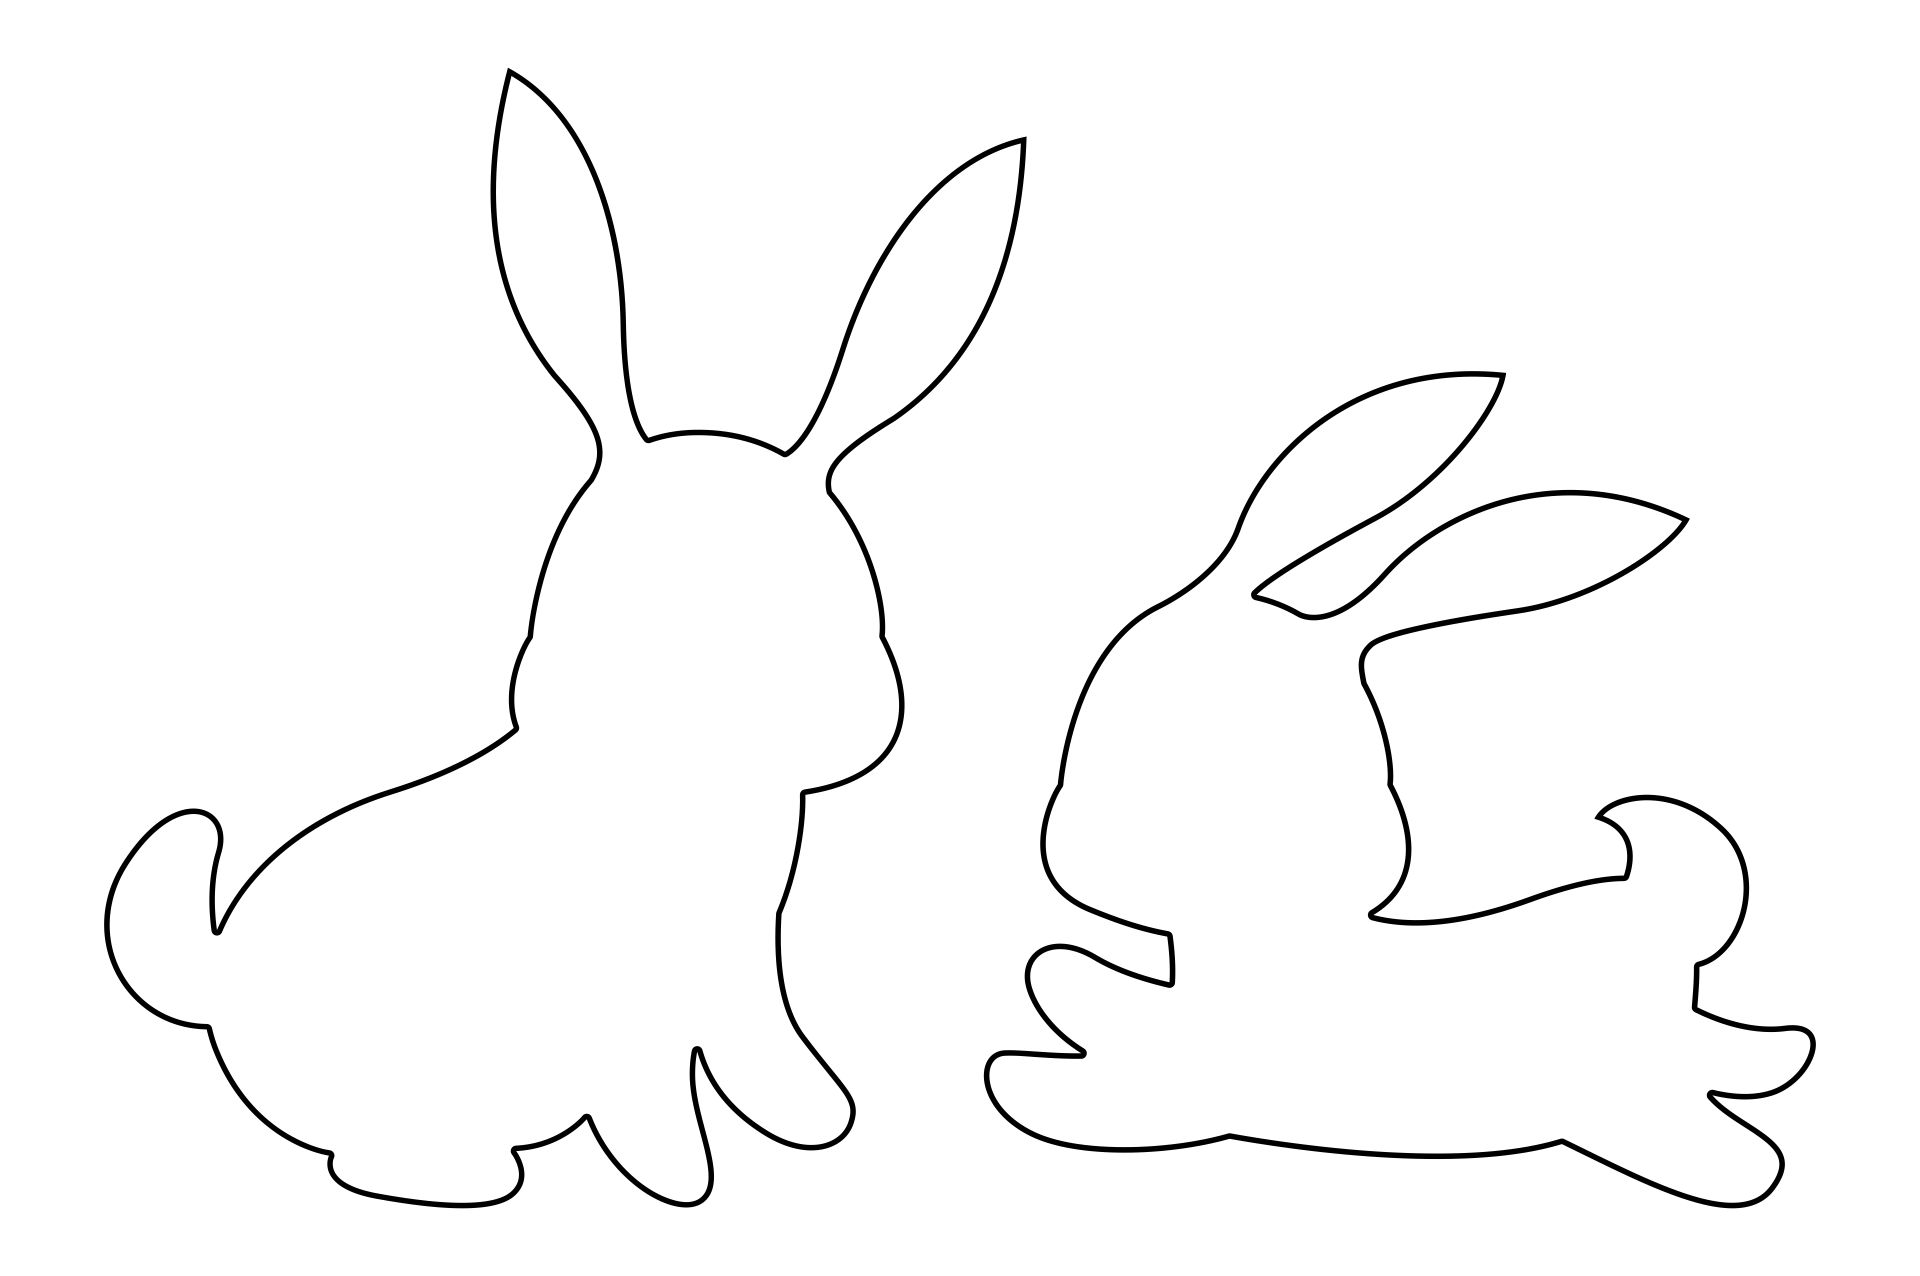 7 Best Images of Bunny Art Free Printables Free Bunny Silhouette Printable 8 X 10, Free